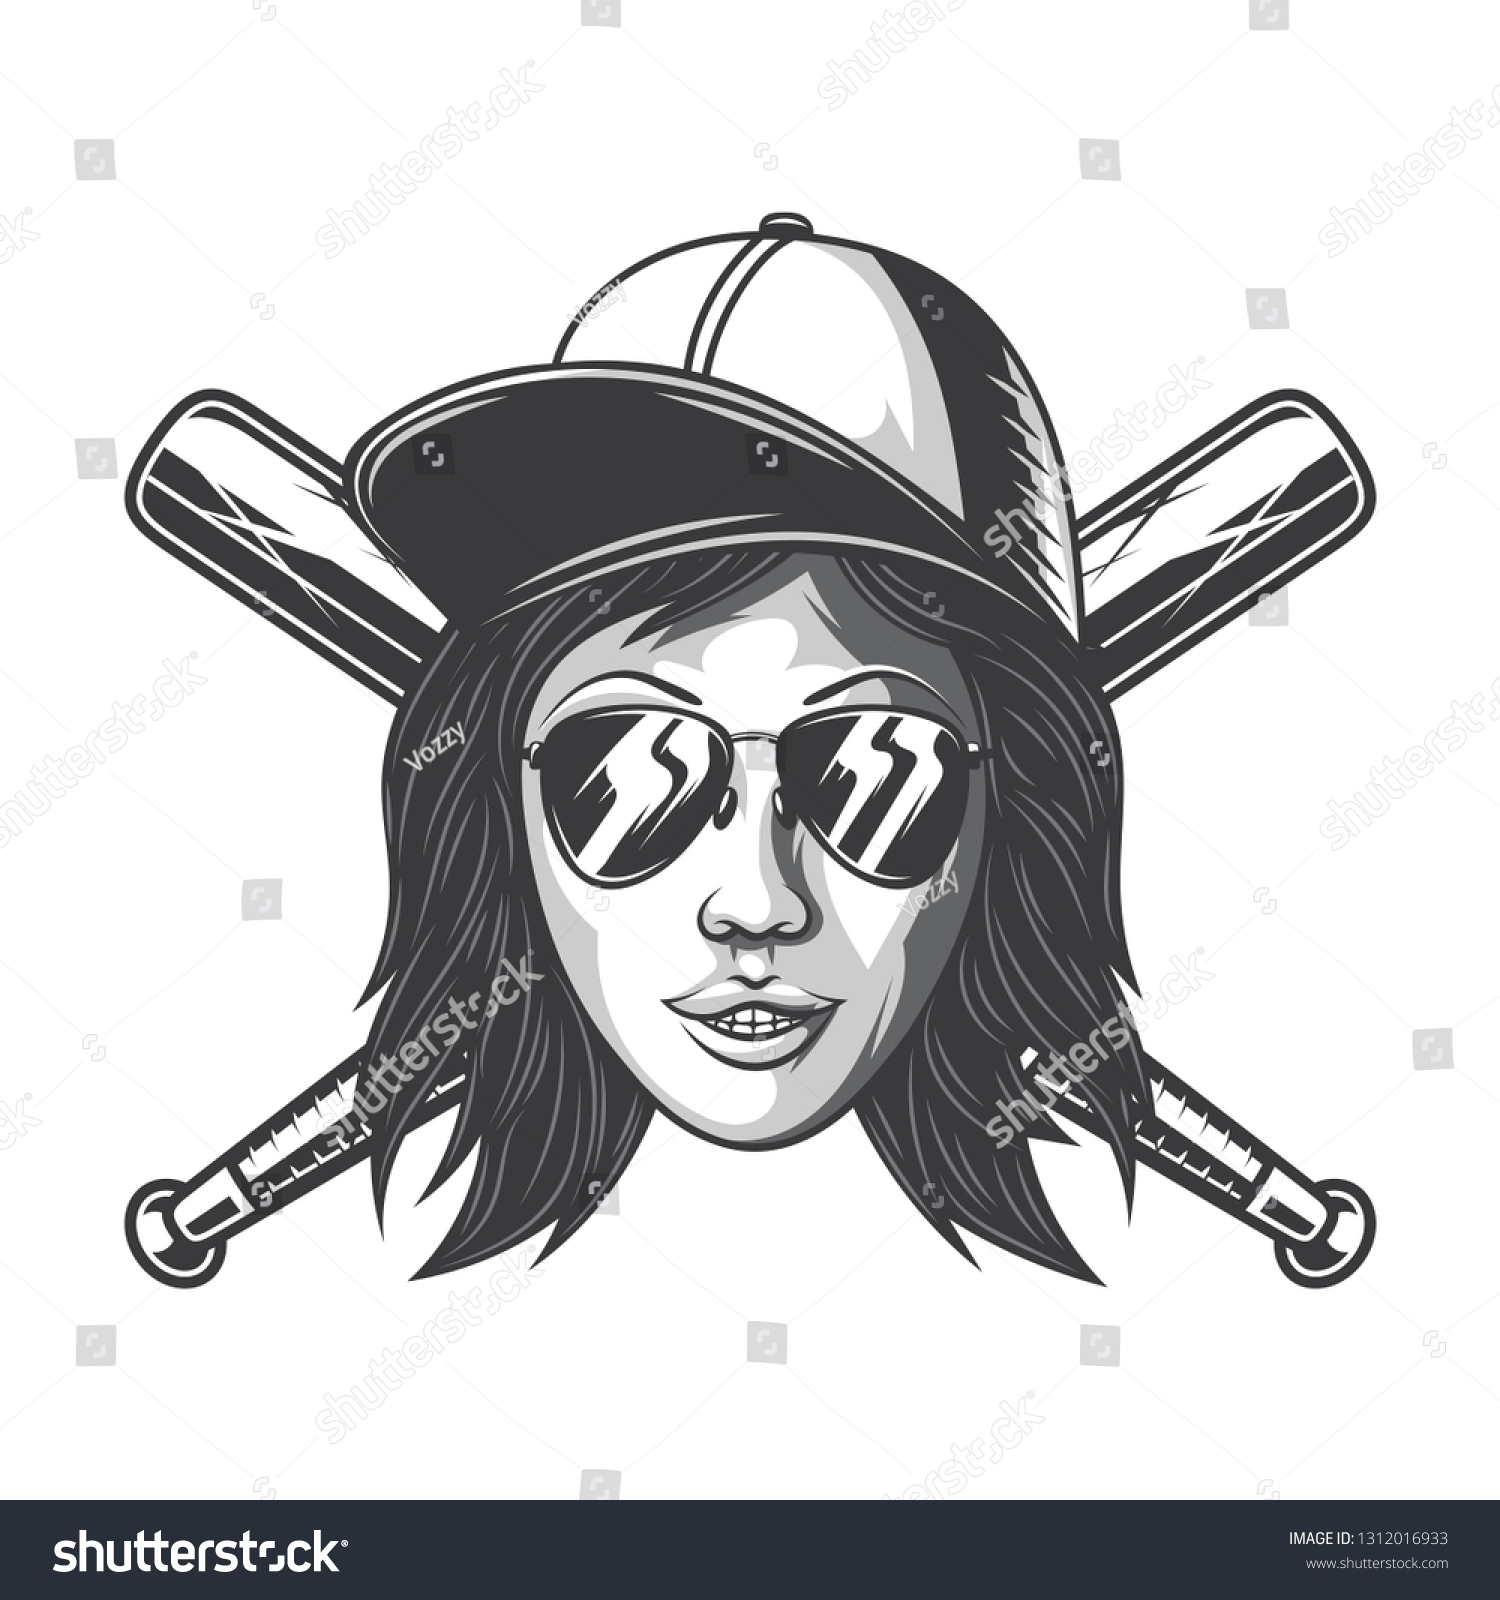 Illustration of a bandit girl with sun glasses, hat and baseball bats. Isolated on white background. #1312016933